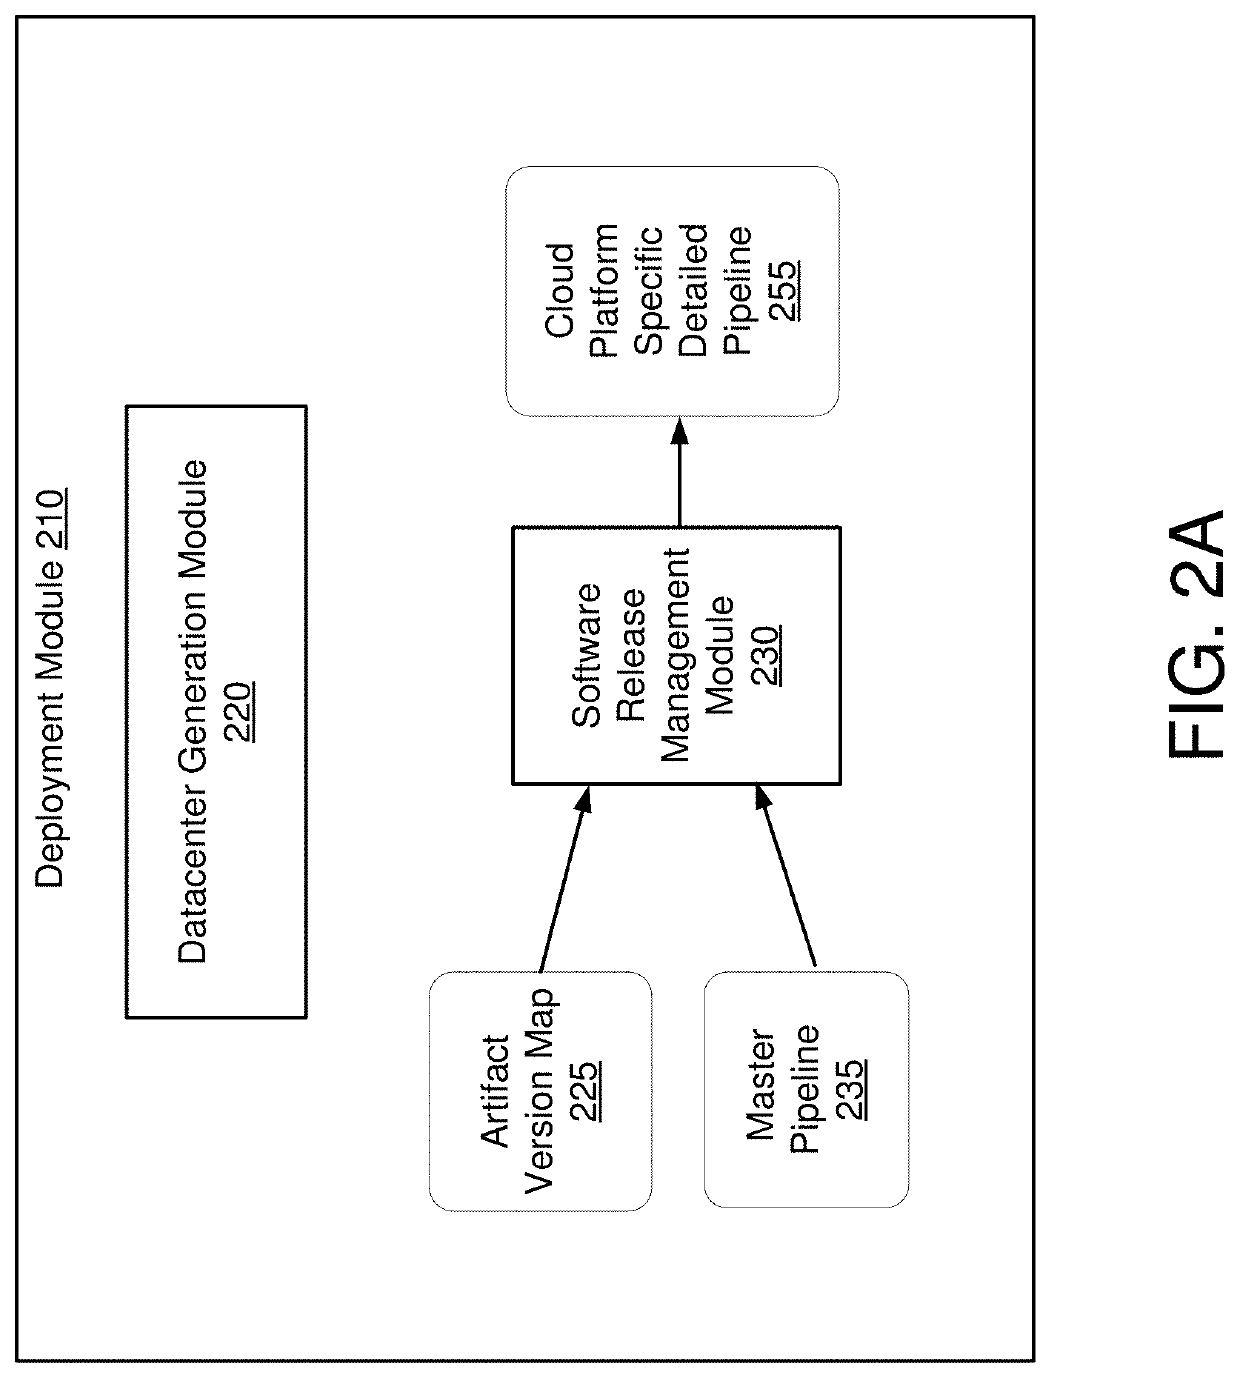 Multi-substrate fault tolerant continuous delivery of datacenter builds on cloud computing platforms